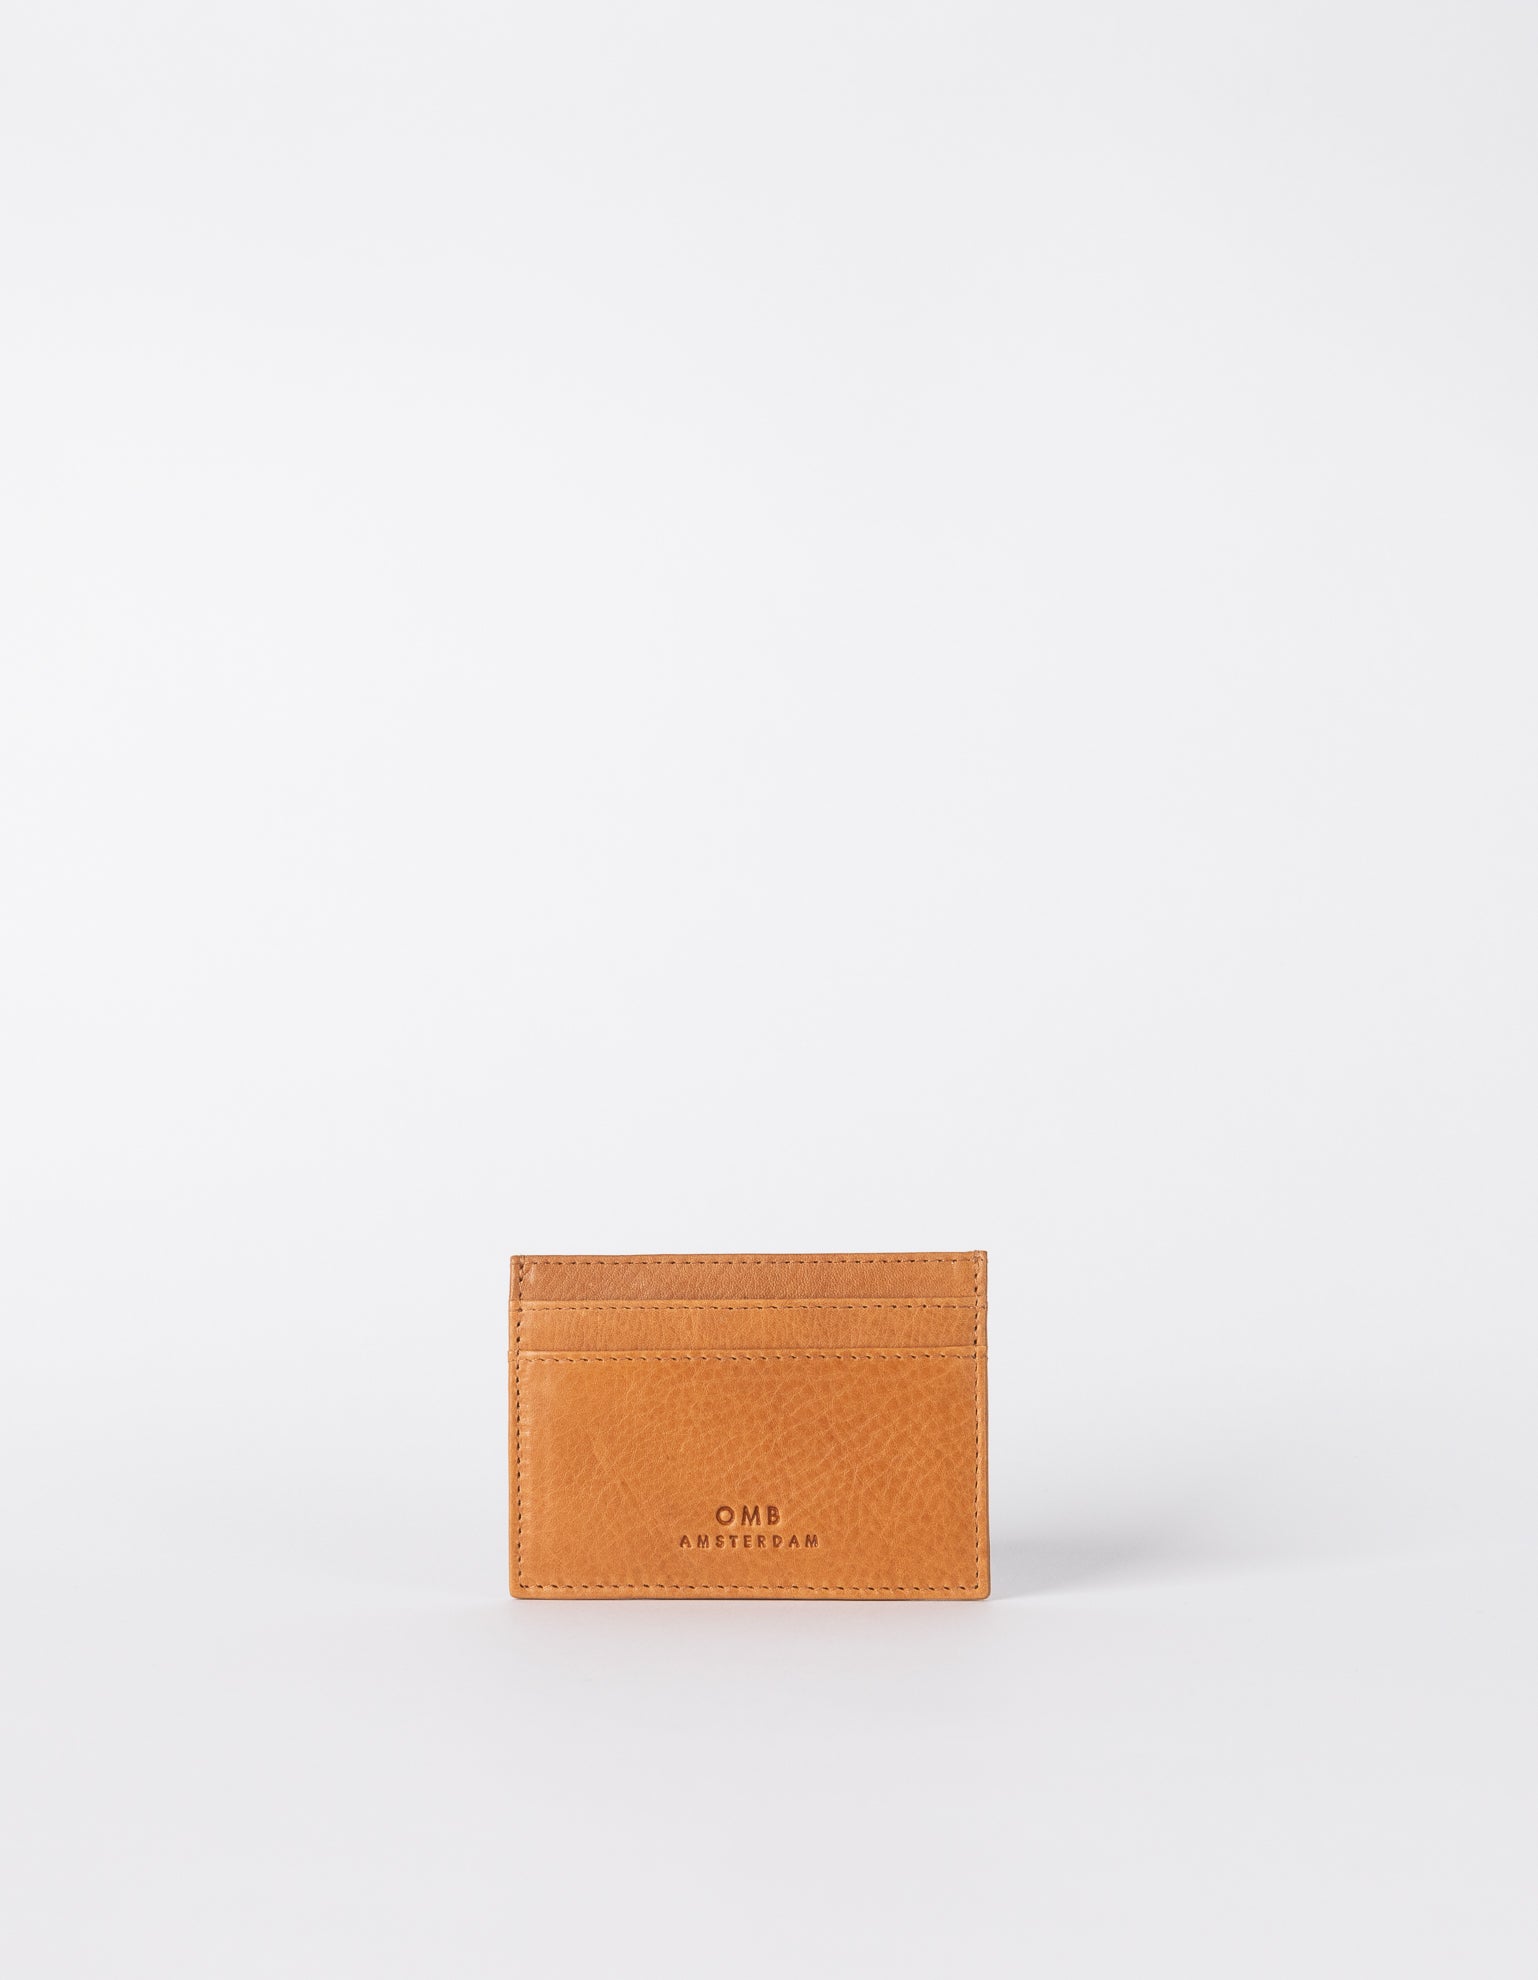 Marks Cardcase Wild Oak Soft Grain Leather. Square leather wallet, card case for bank cards. Front product image.